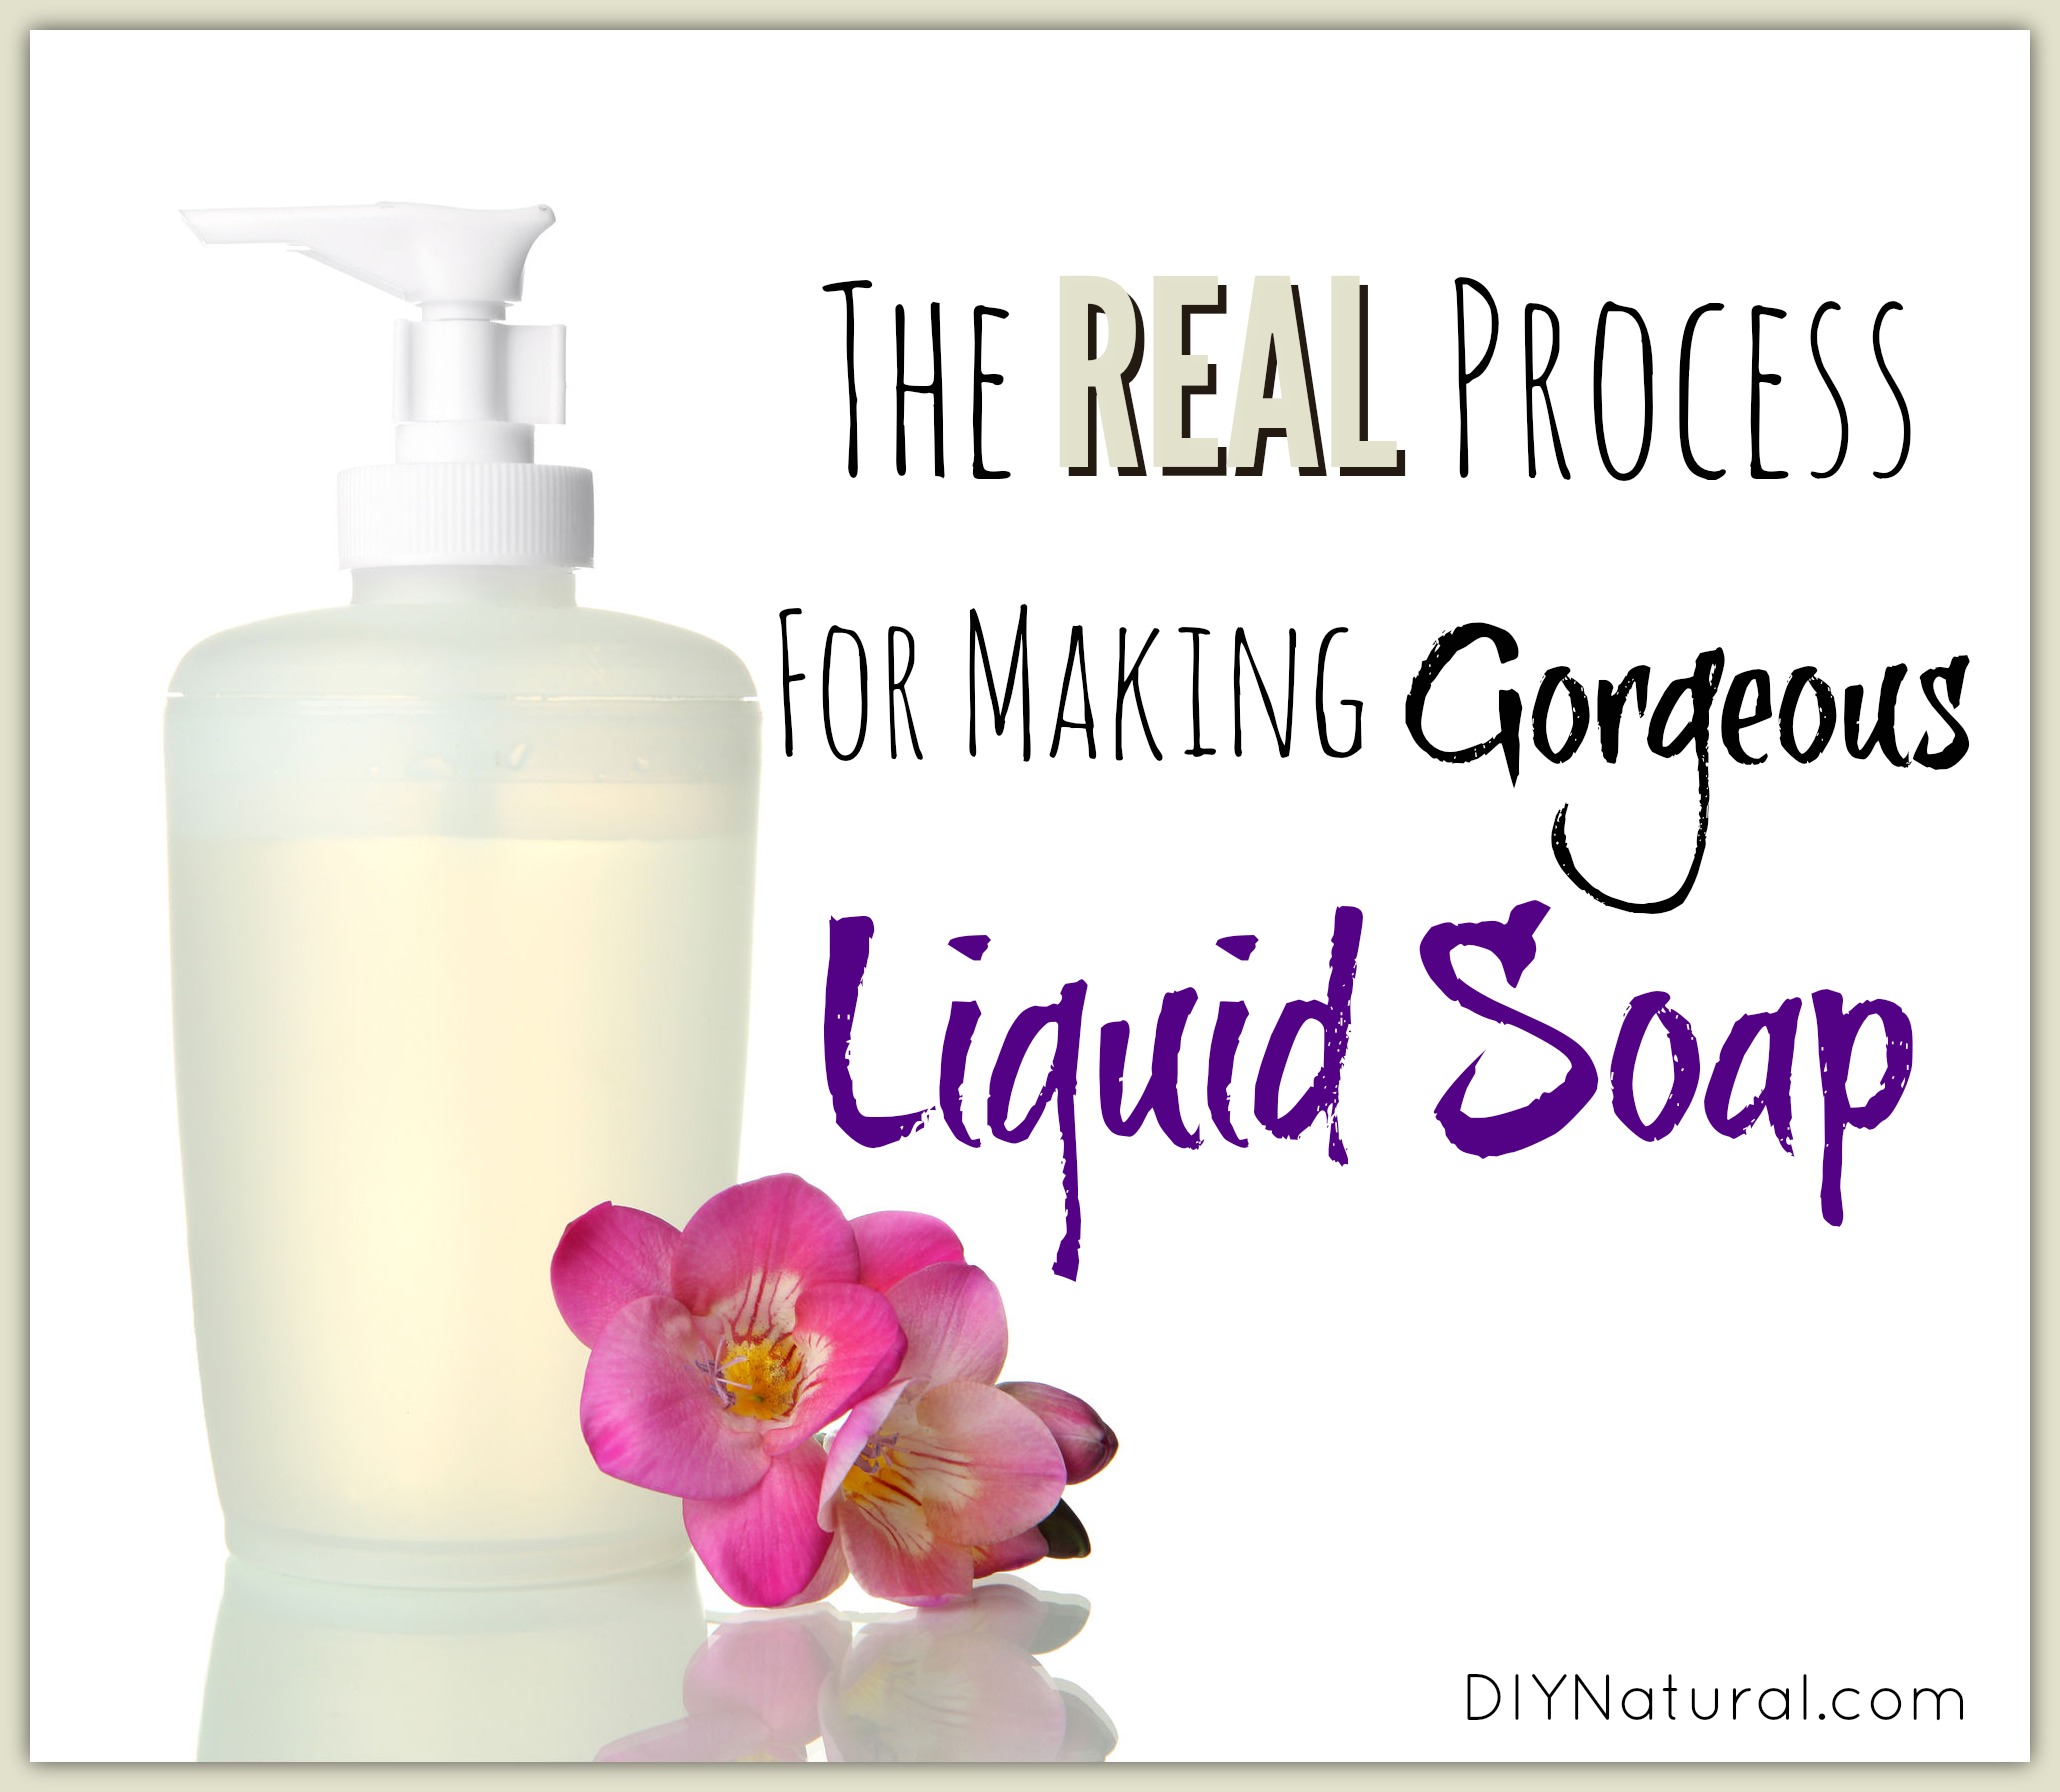 How To Make Liquid Soap That is Natural and Amazing